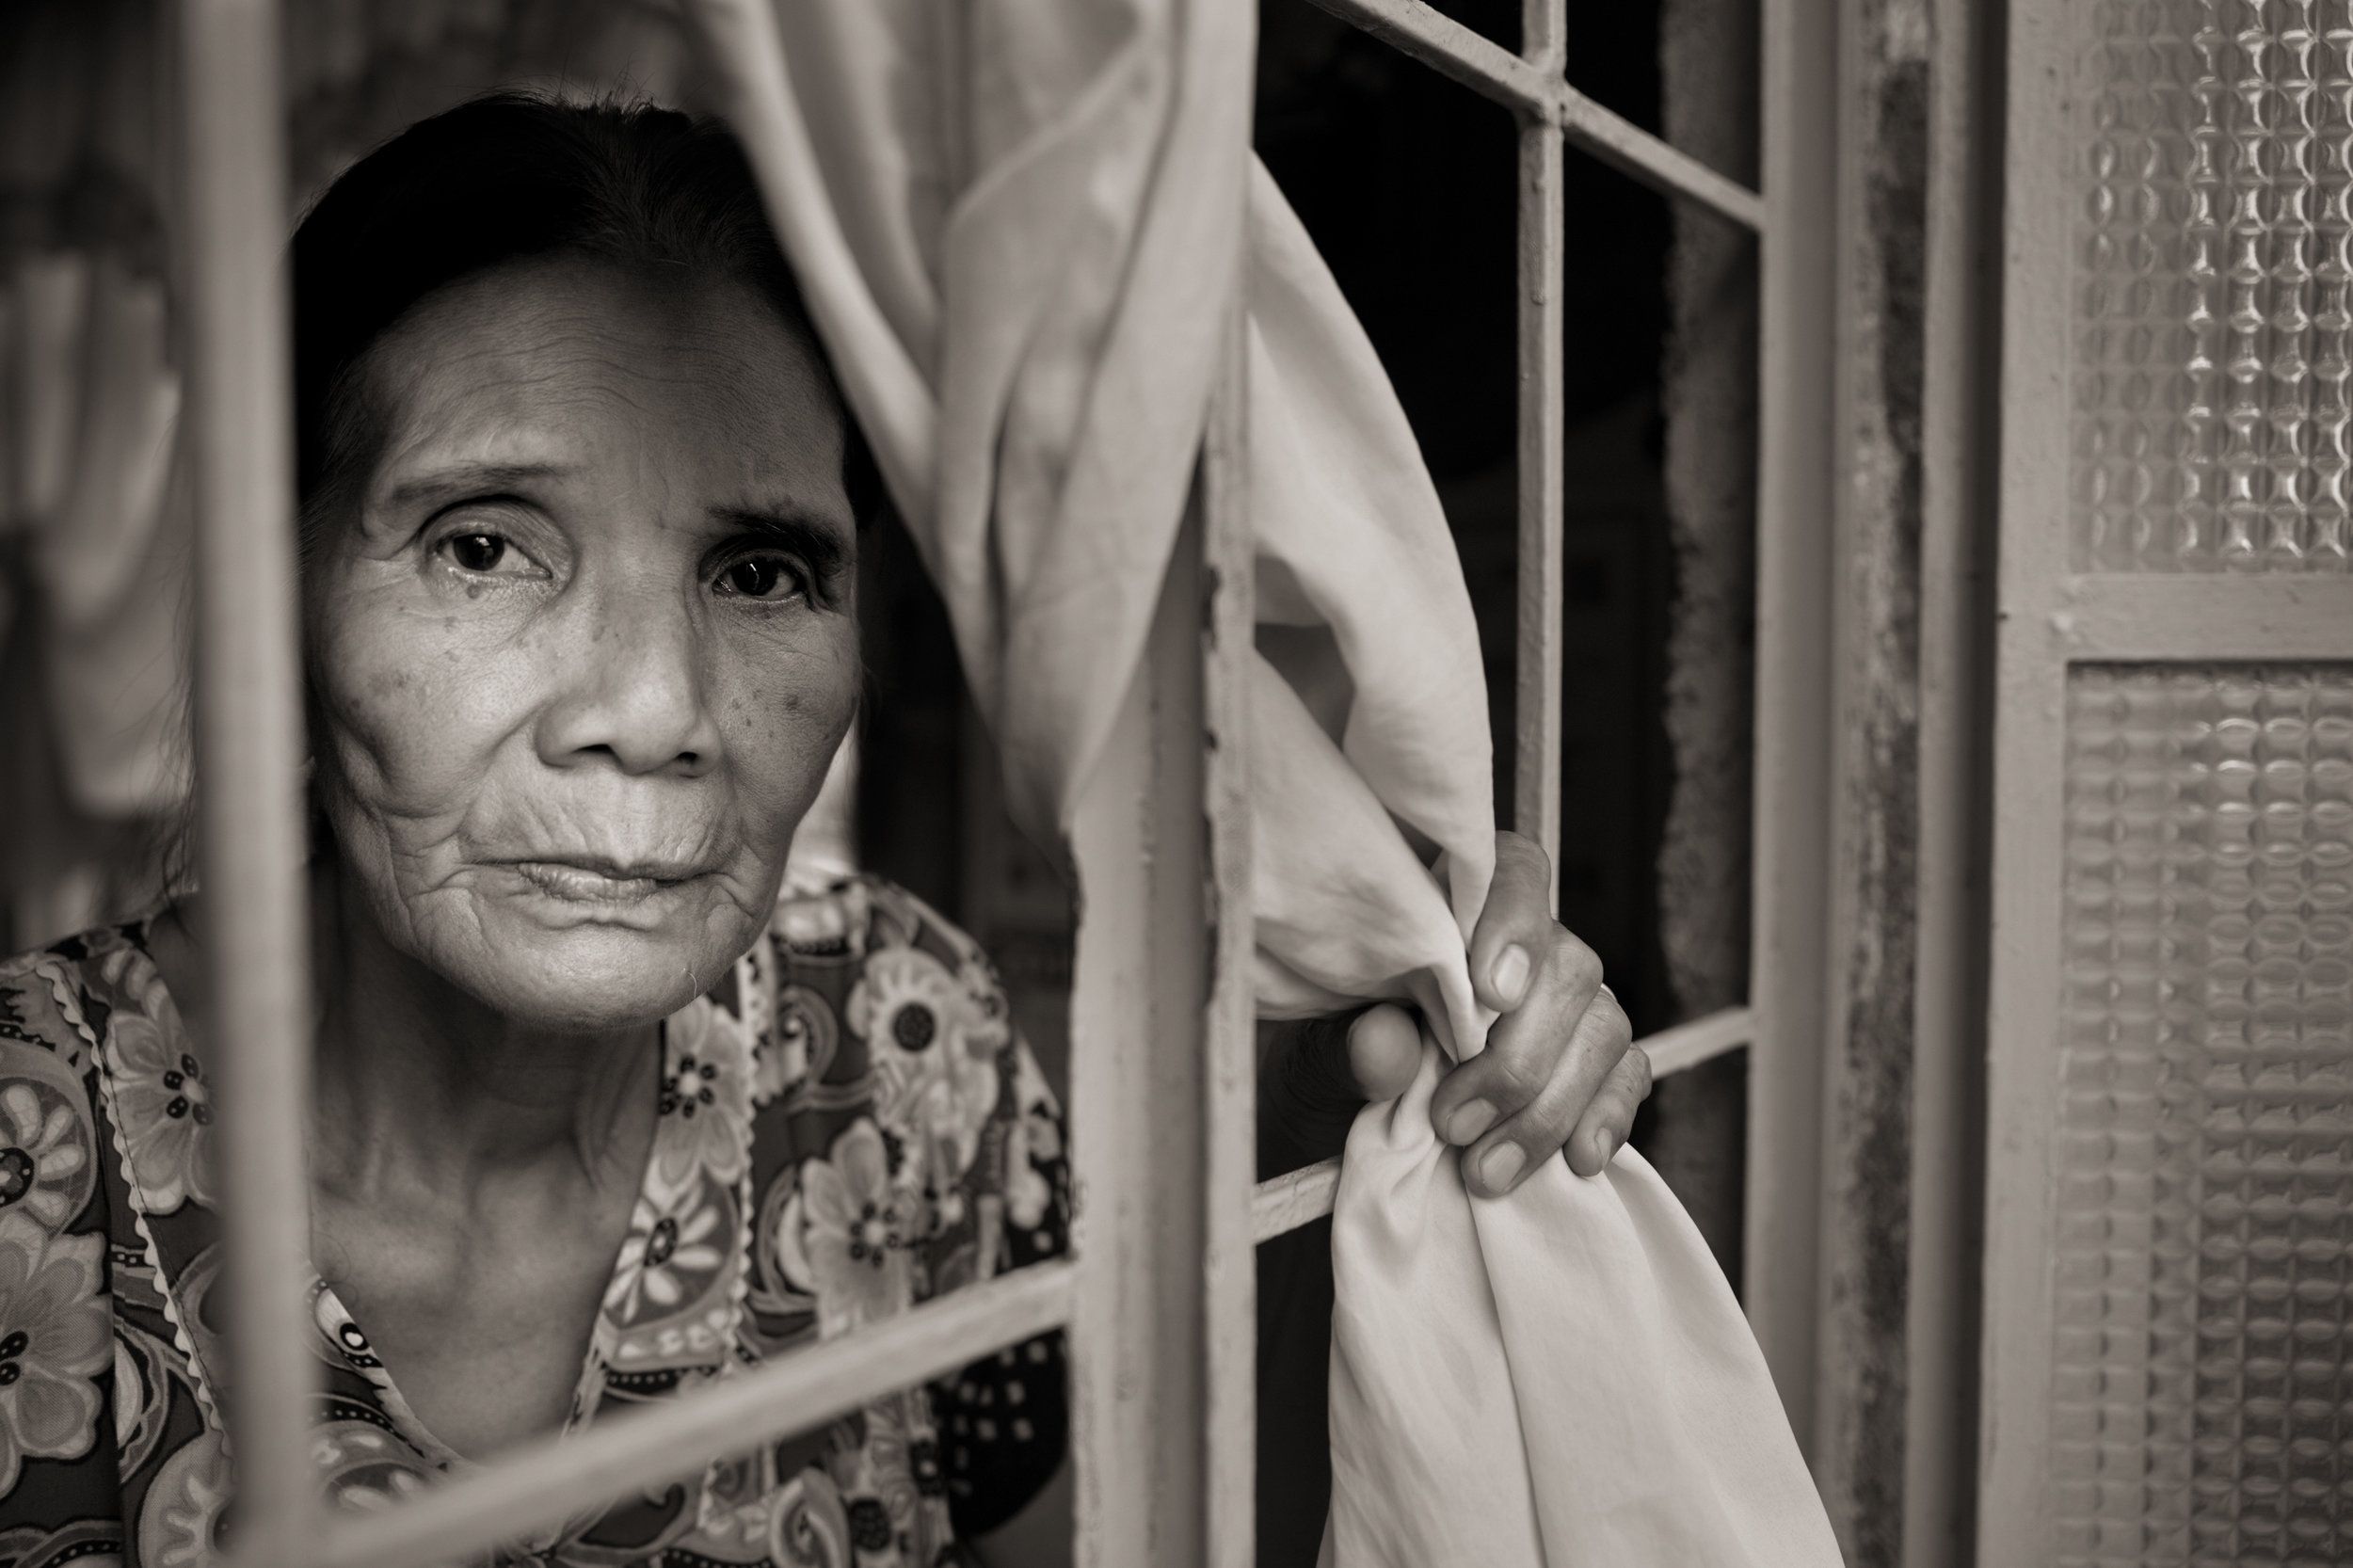 Perla Bulaon Balingit said she still has flashbacks of the atrocities she suffered at the hands of Japanese soldiers and wonders, "How were they able to do that to another human as a human being?" Image by Cheryl Diaz Meyer. Philippines, 2019.